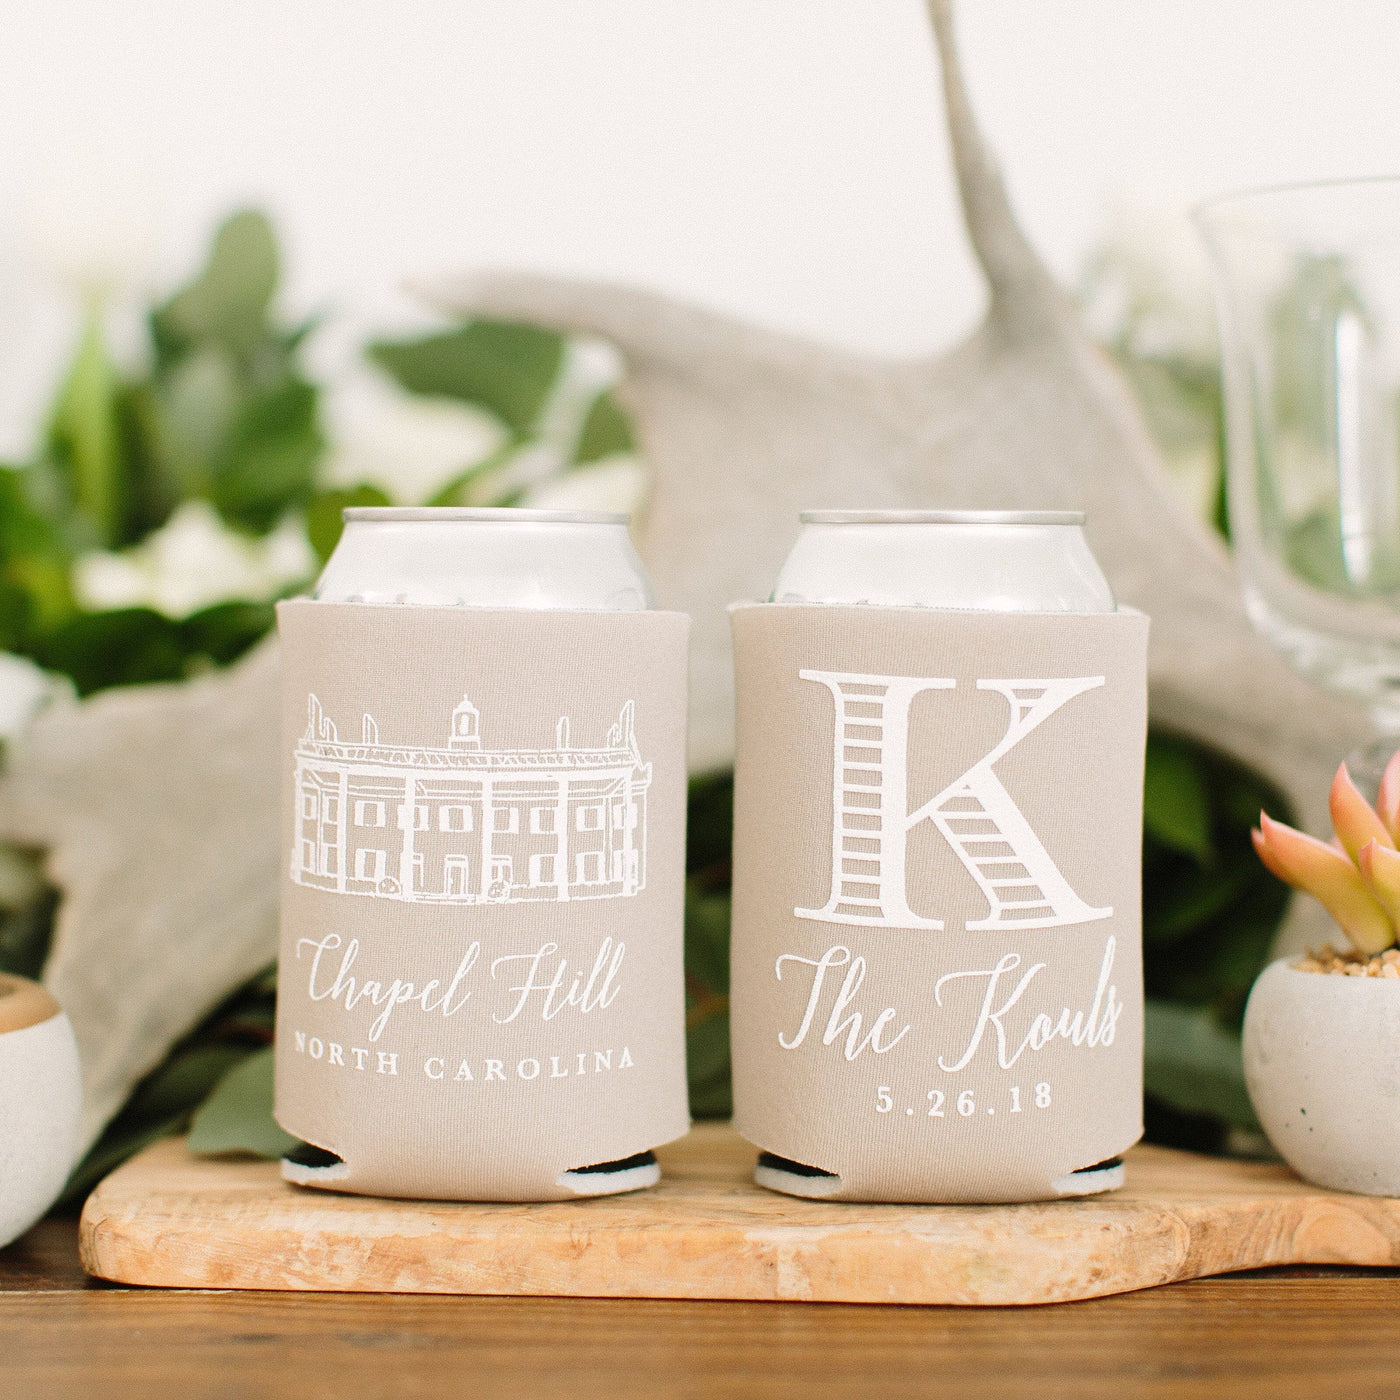 "The Venue Collection" | Rose Hill Estate Can Coolers